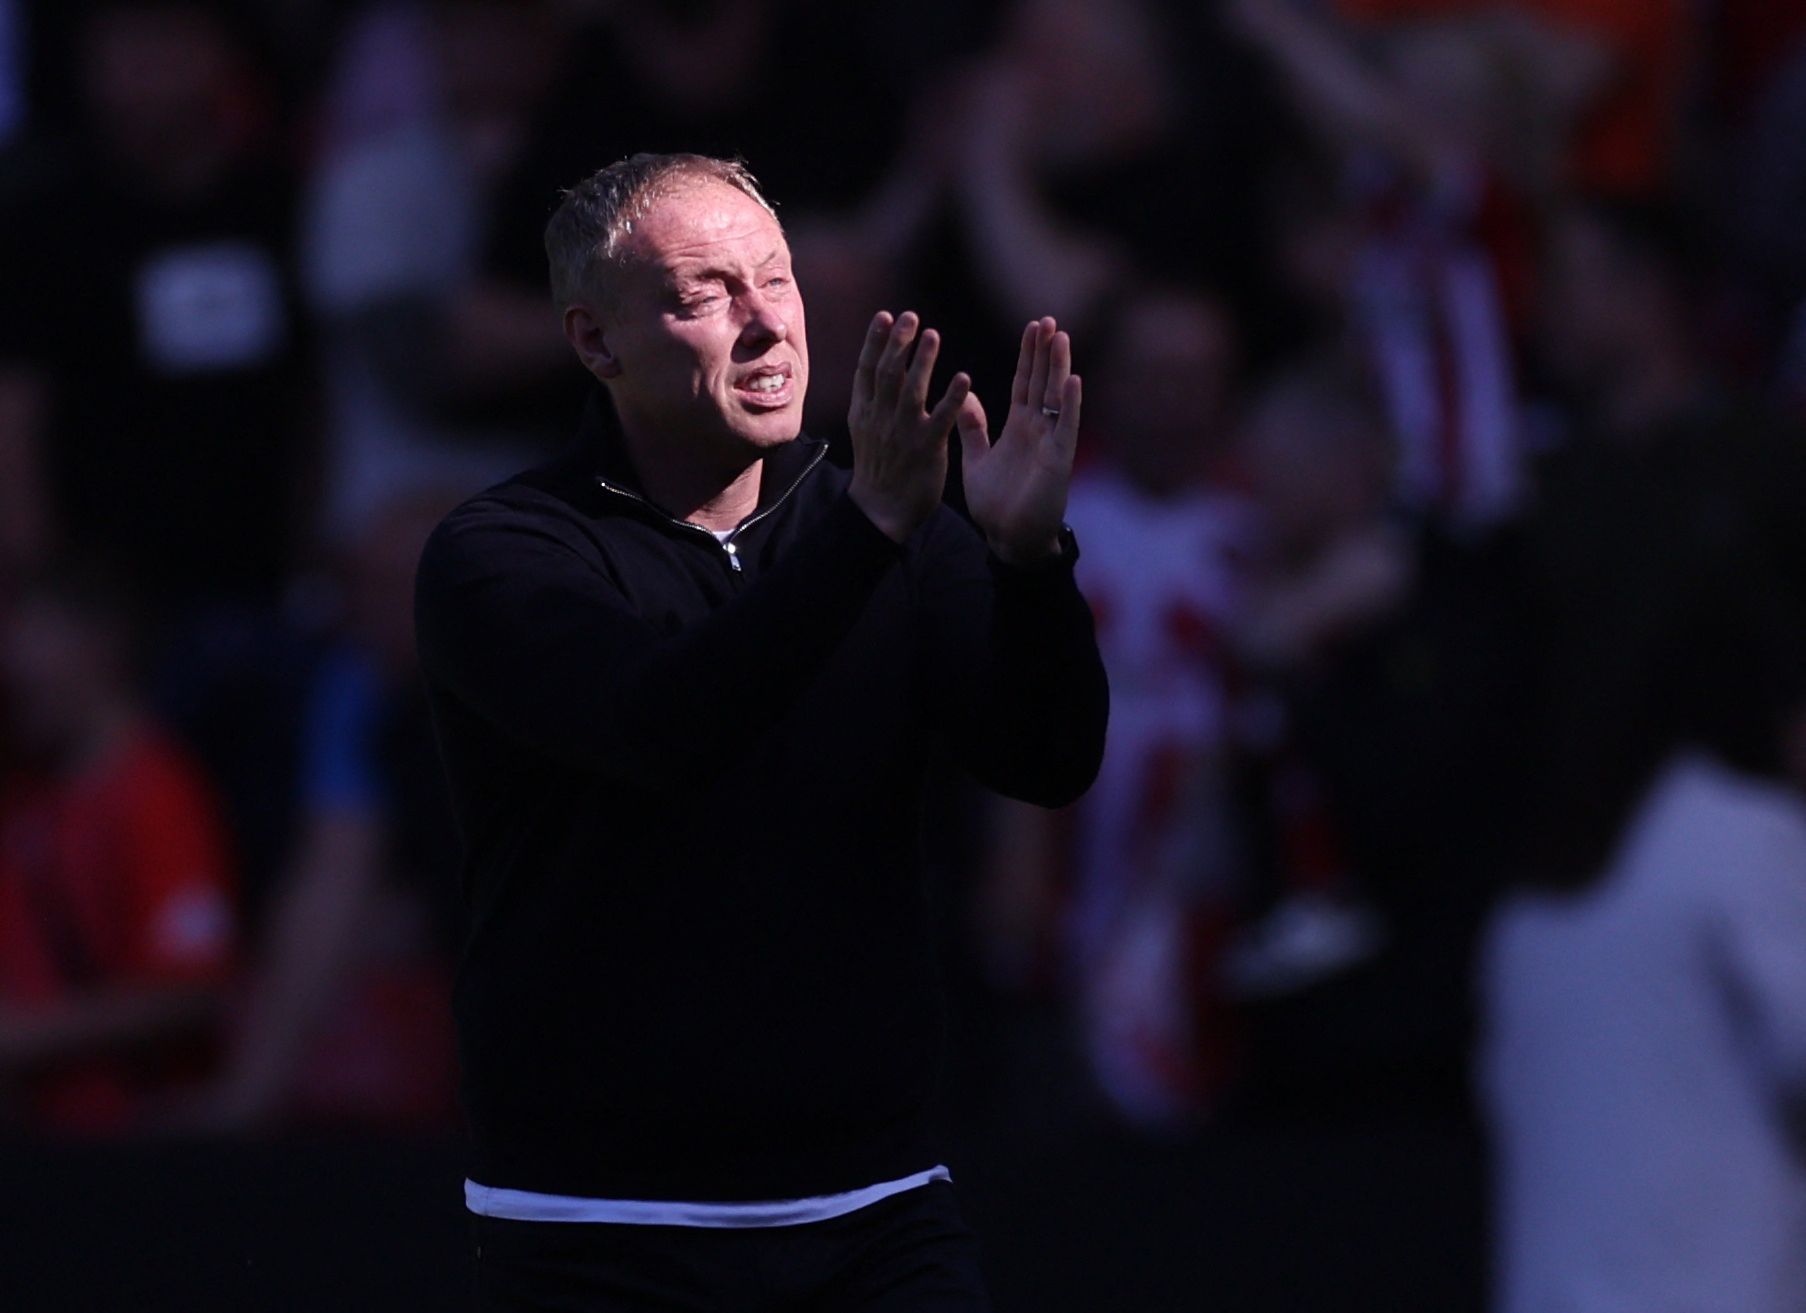 Soccer Football - Championship - Semi Final - First Leg - Sheffield United v Nottingham Forest - Bramall Lane, Sheffield, Britain - May 14, 2022 Nottingham Forest manager Steve Cooper applauds fans after the match Action Images via Reuters/Carl Recine EDITORIAL USE ONLY. No use with unauthorized audio, video, data, fixture lists, club/league logos or 'live' services. Online in-match use limited to 75 images, no video emulation. No use in betting, games or single club /league/player publications.